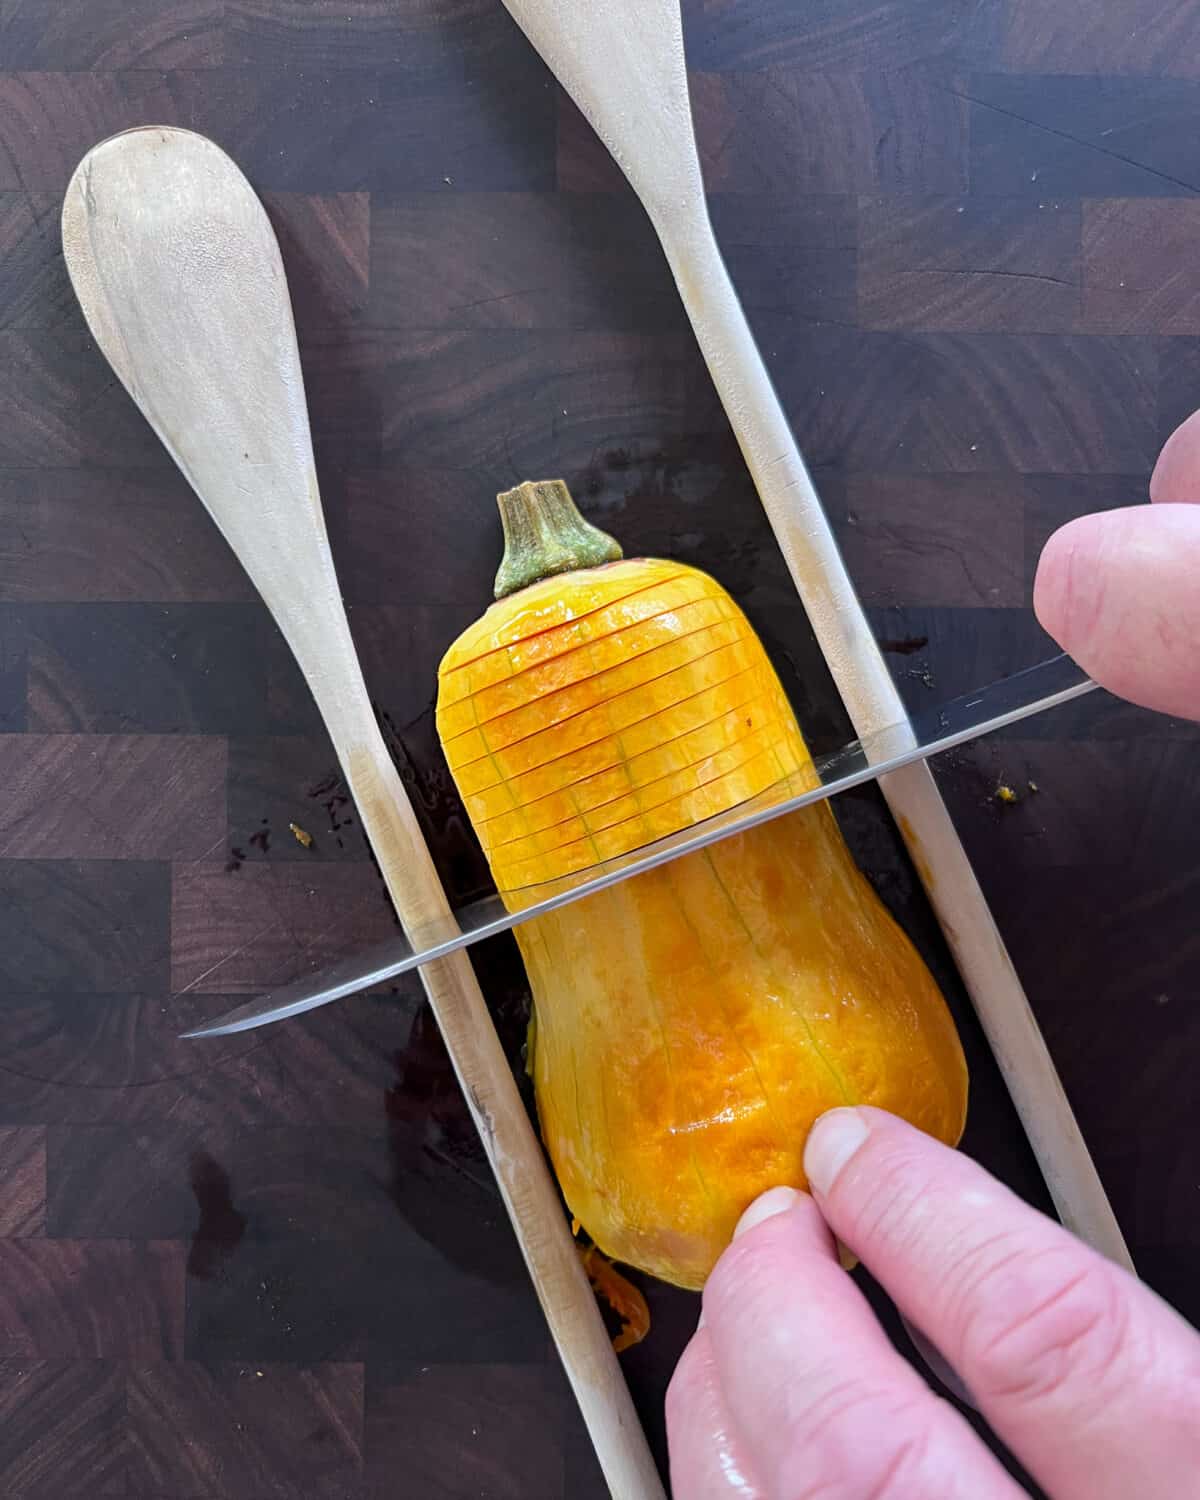 Tip: When slicing the squash to create “Hasselbacking”, use two wooden spoons to keep the squash from rolling and prevent the knife from cutting all the way through.